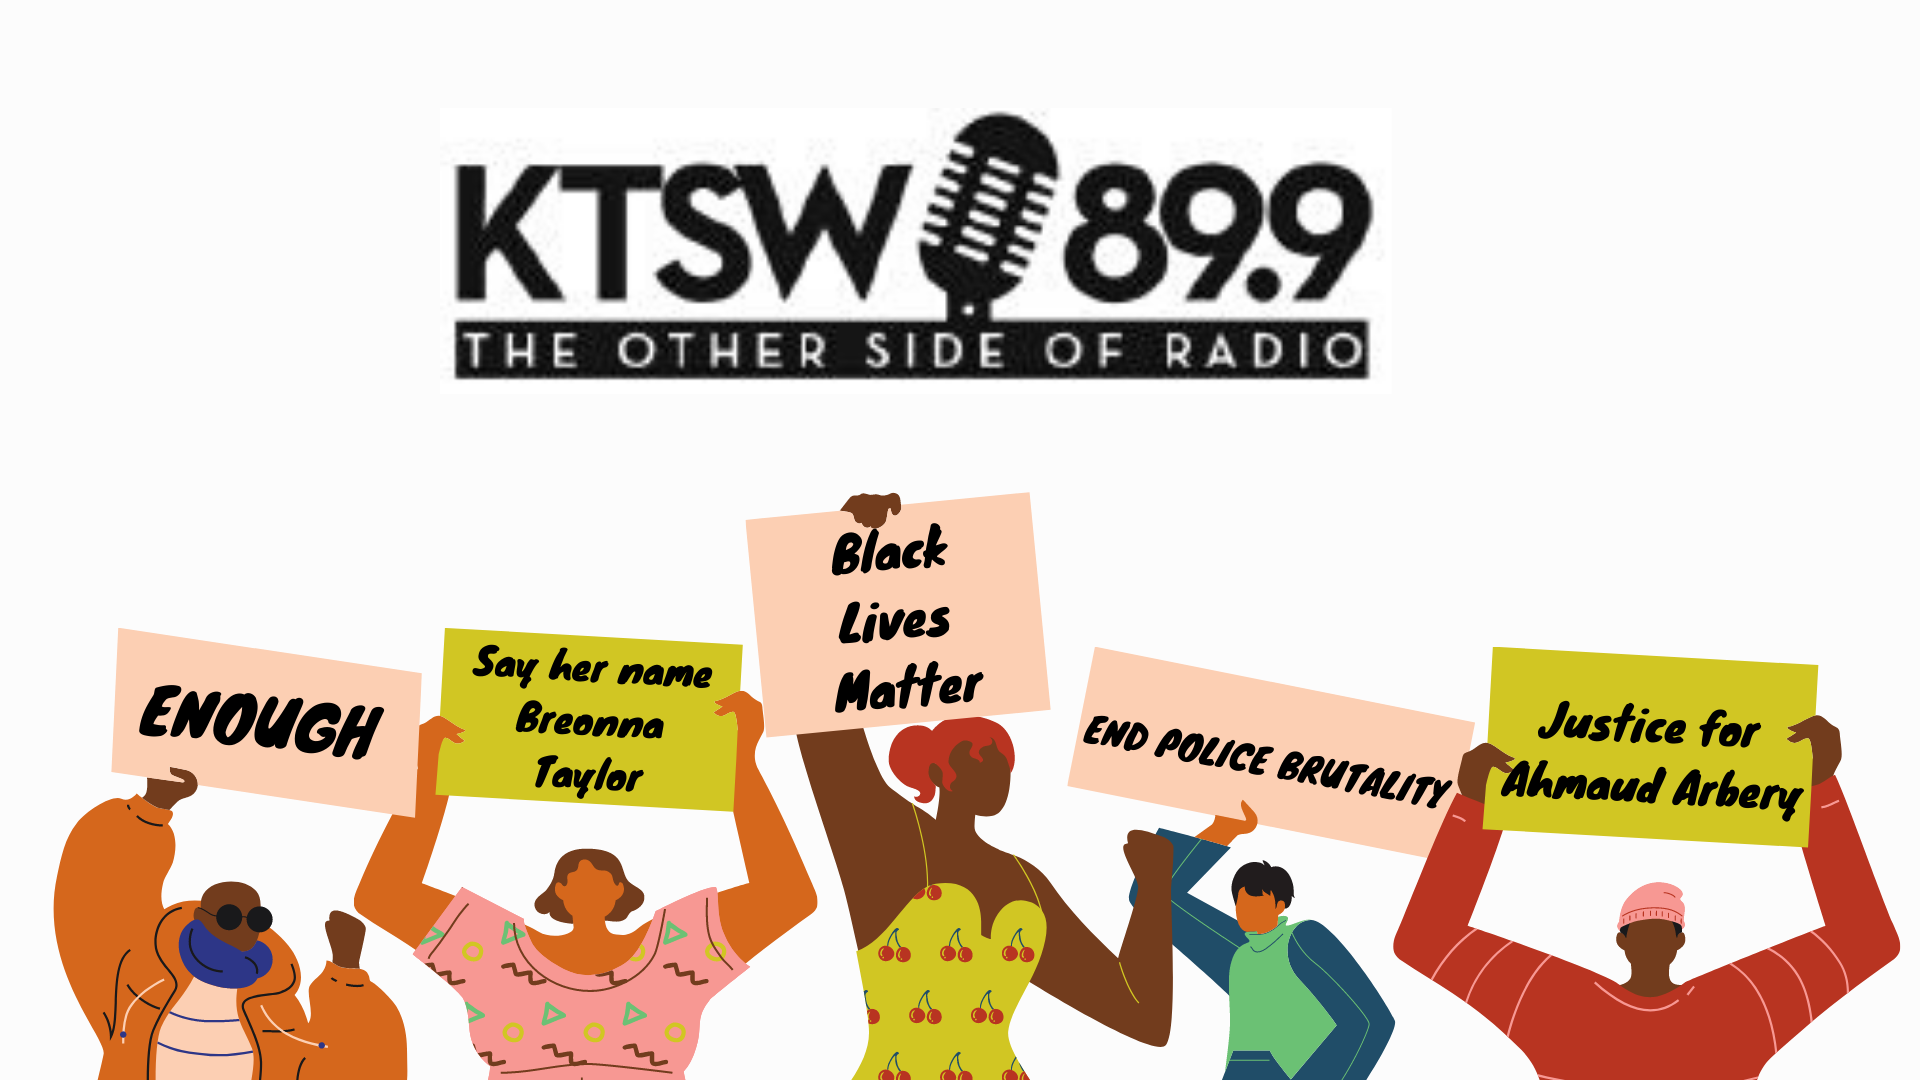 black lives matter signs being held by drawn black figures with the ktsw 89.9 logo above on a white back ground